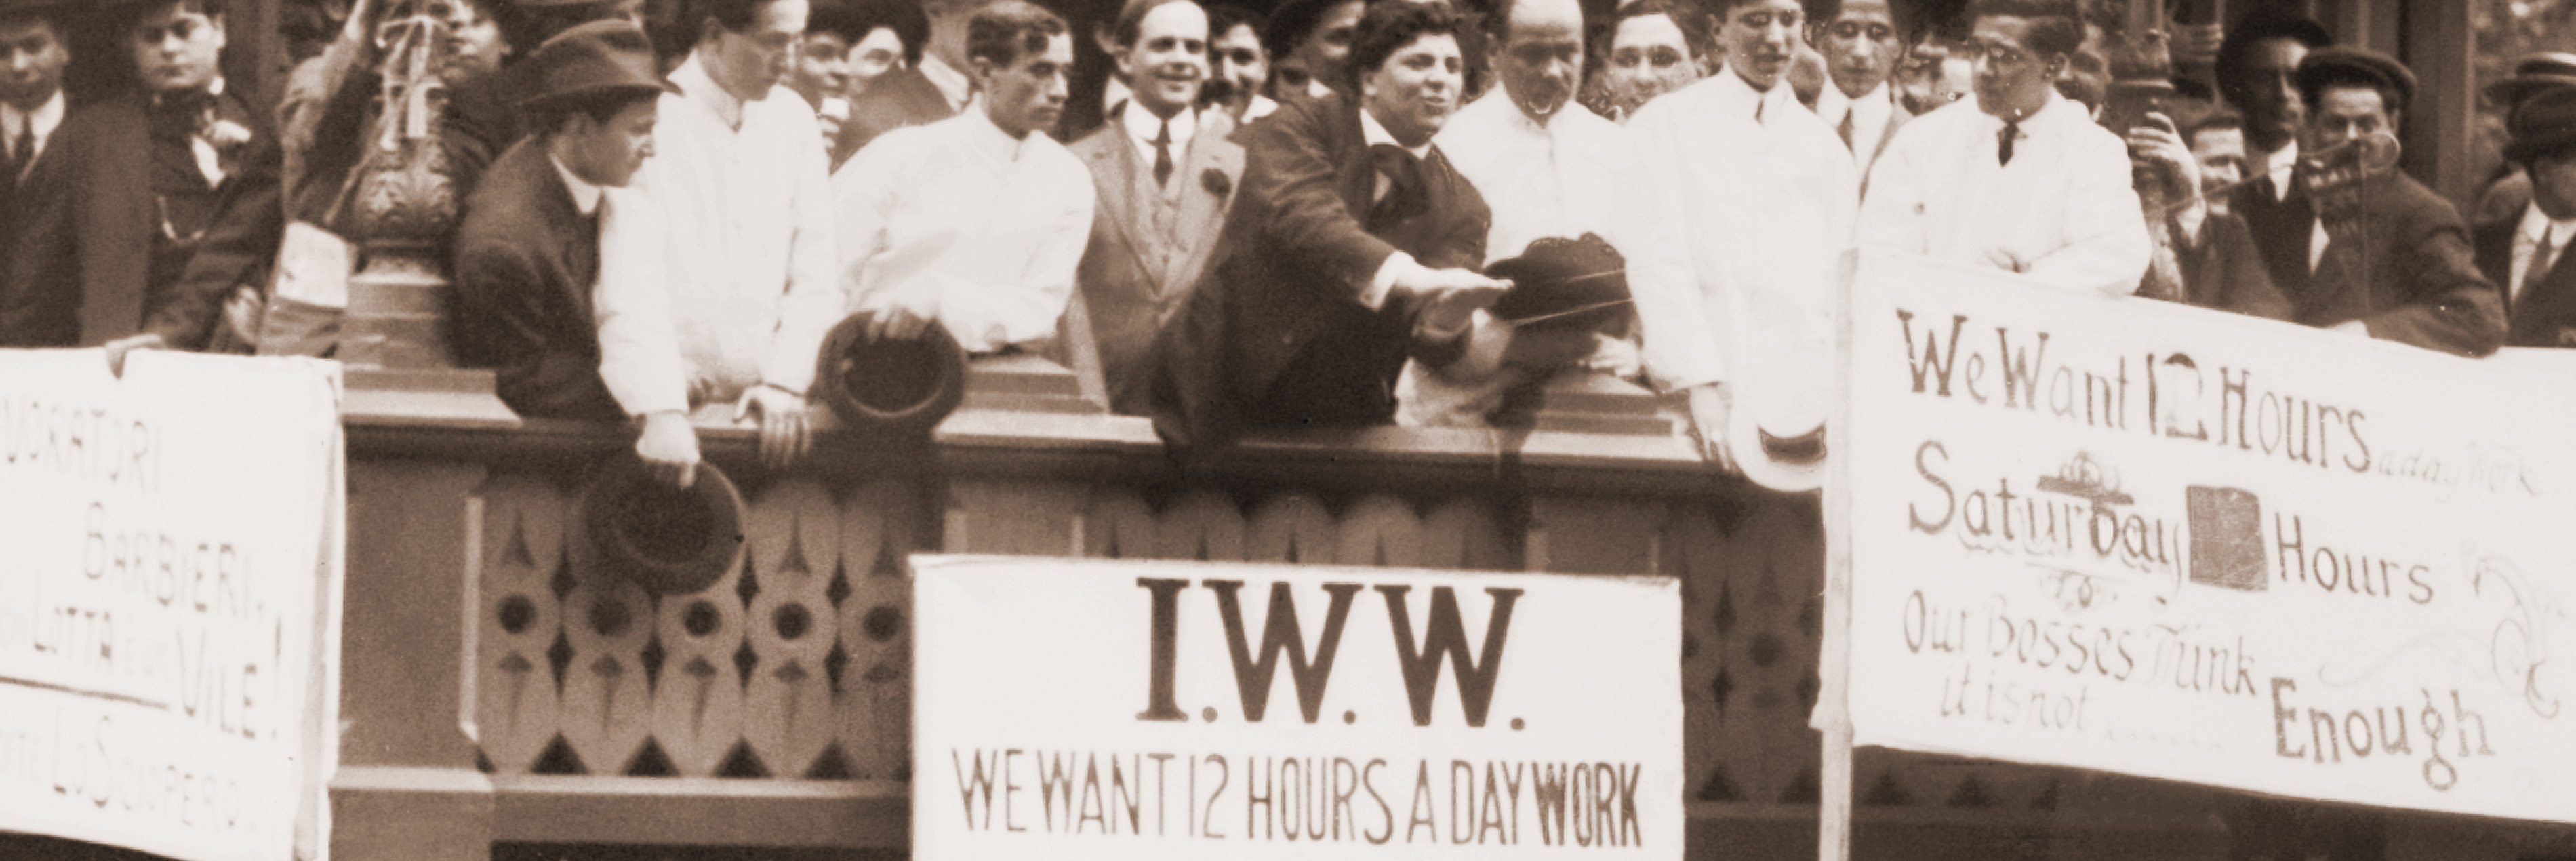 Archival photo of workers protesting